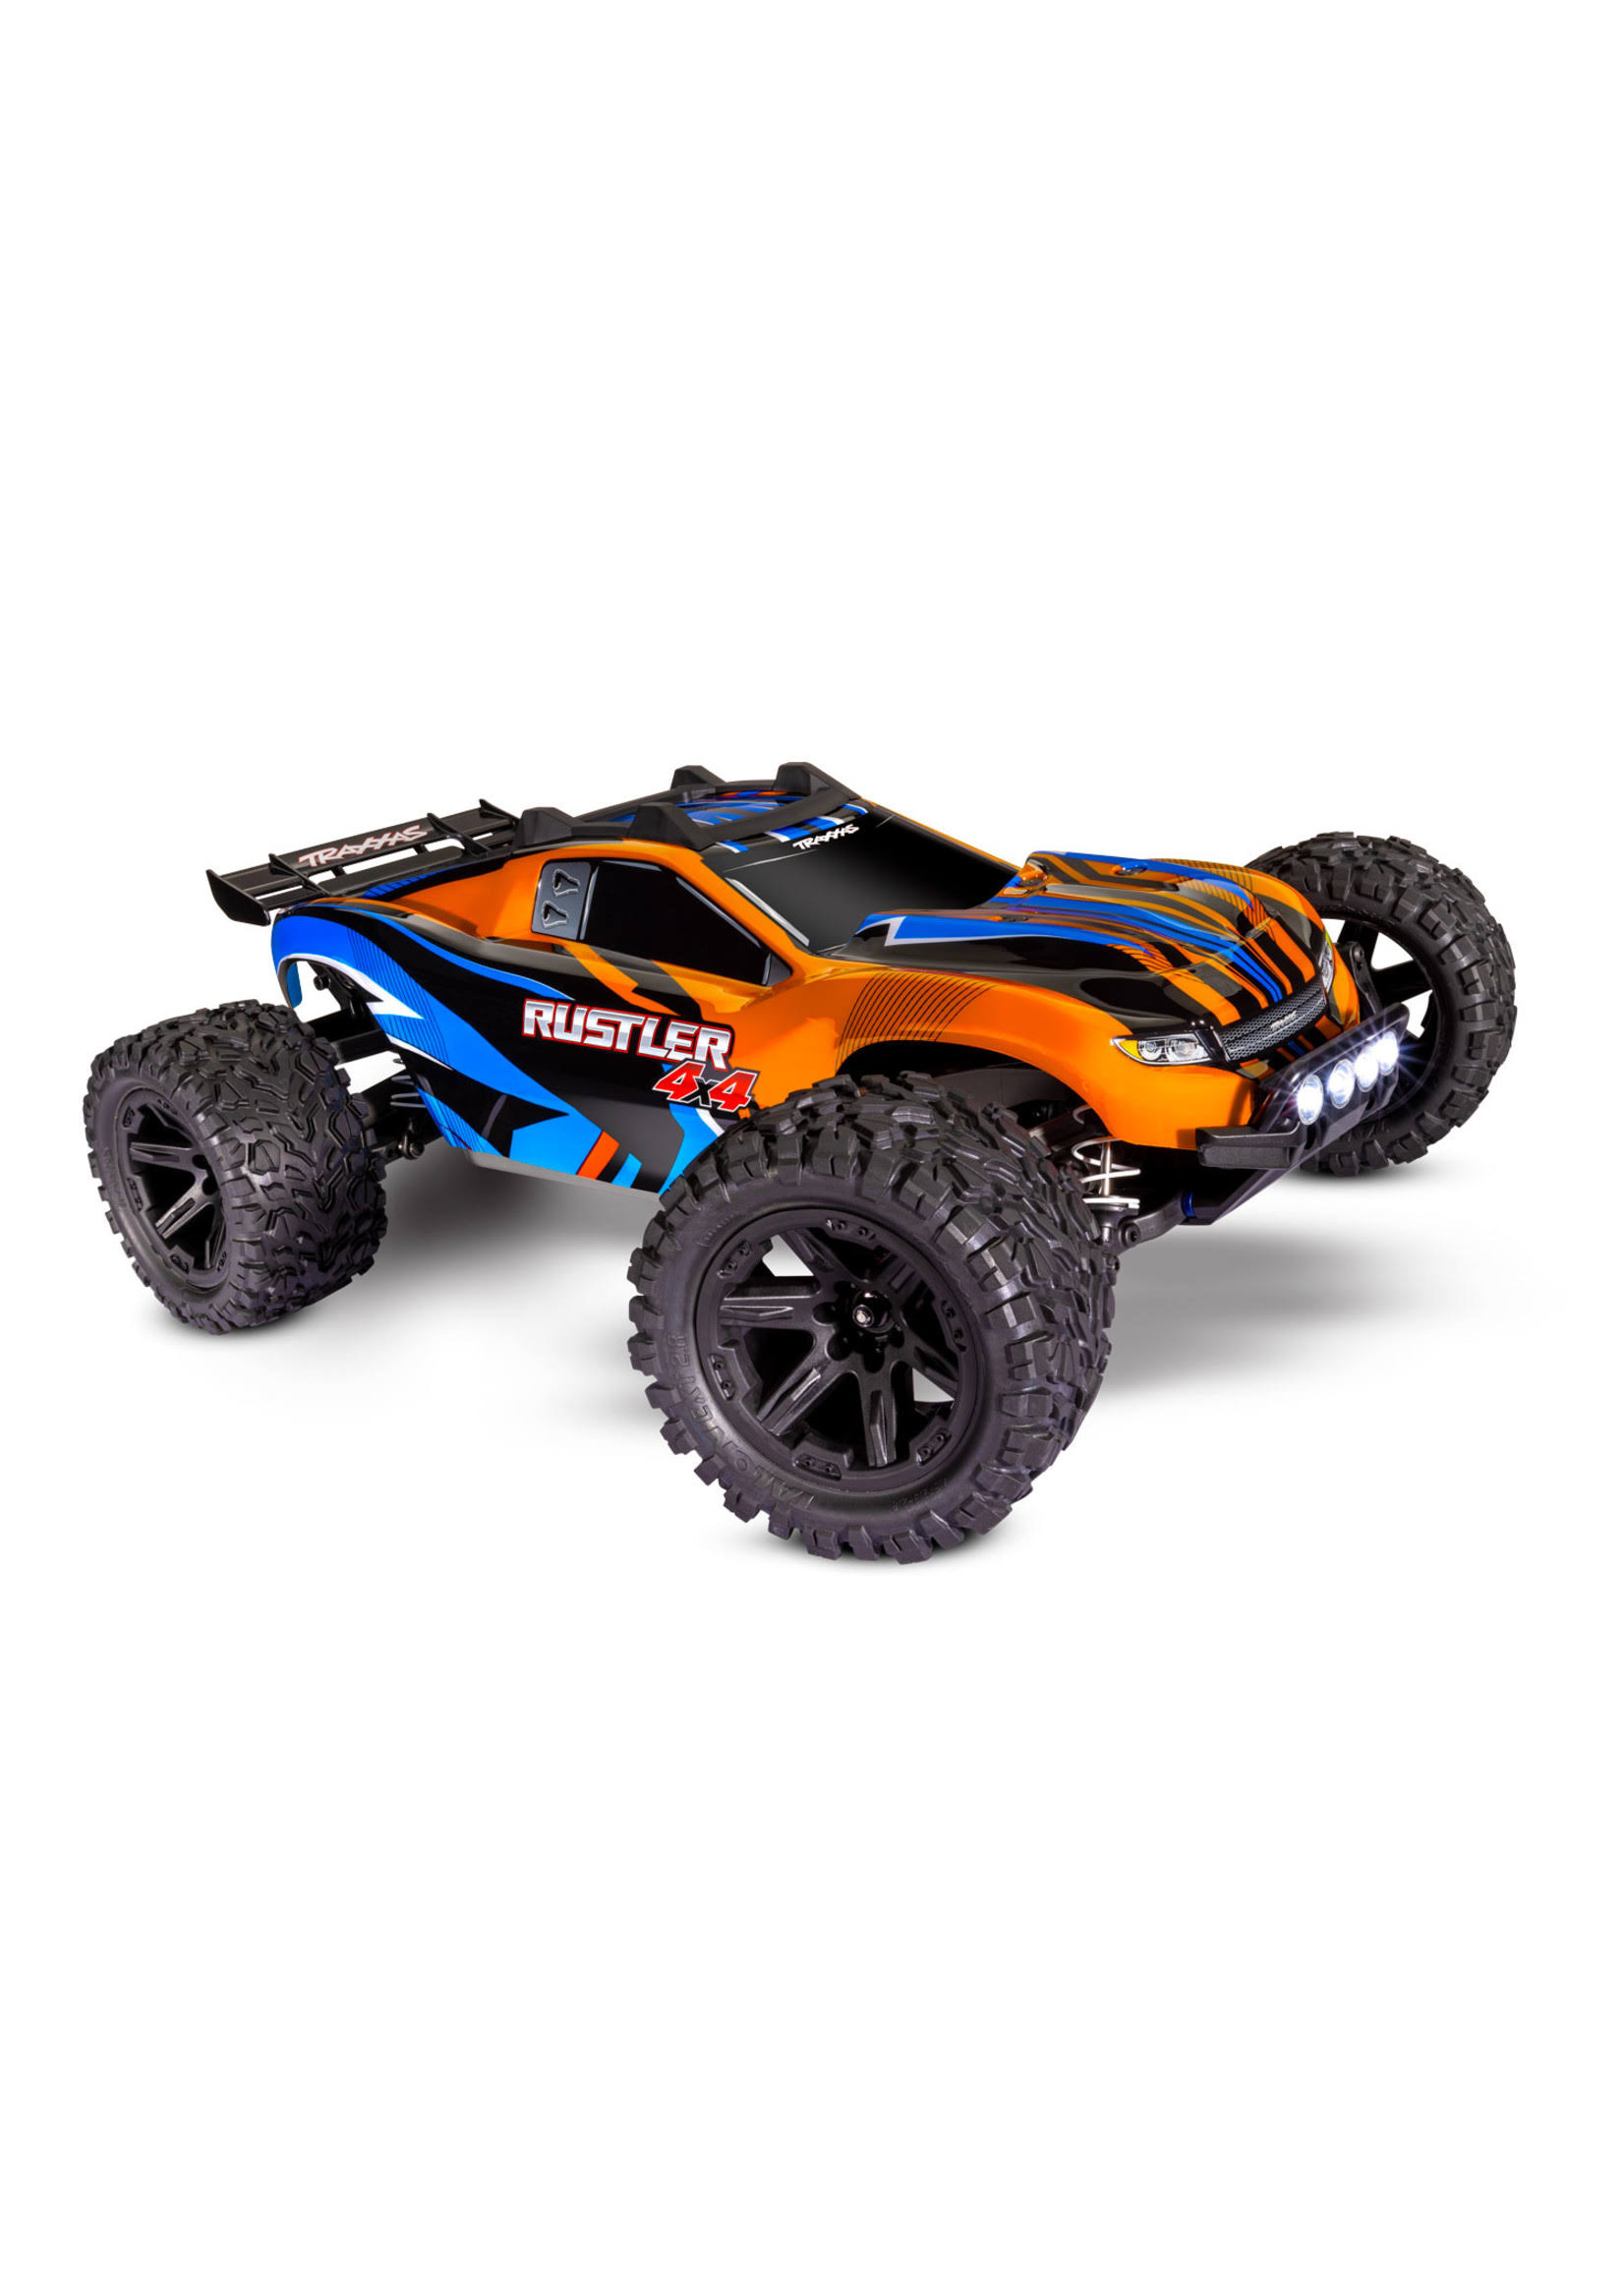 Traxxas Rustler 4x4 Orange RTR XL-5 Brushed with Battery/Charger LED Light 1/